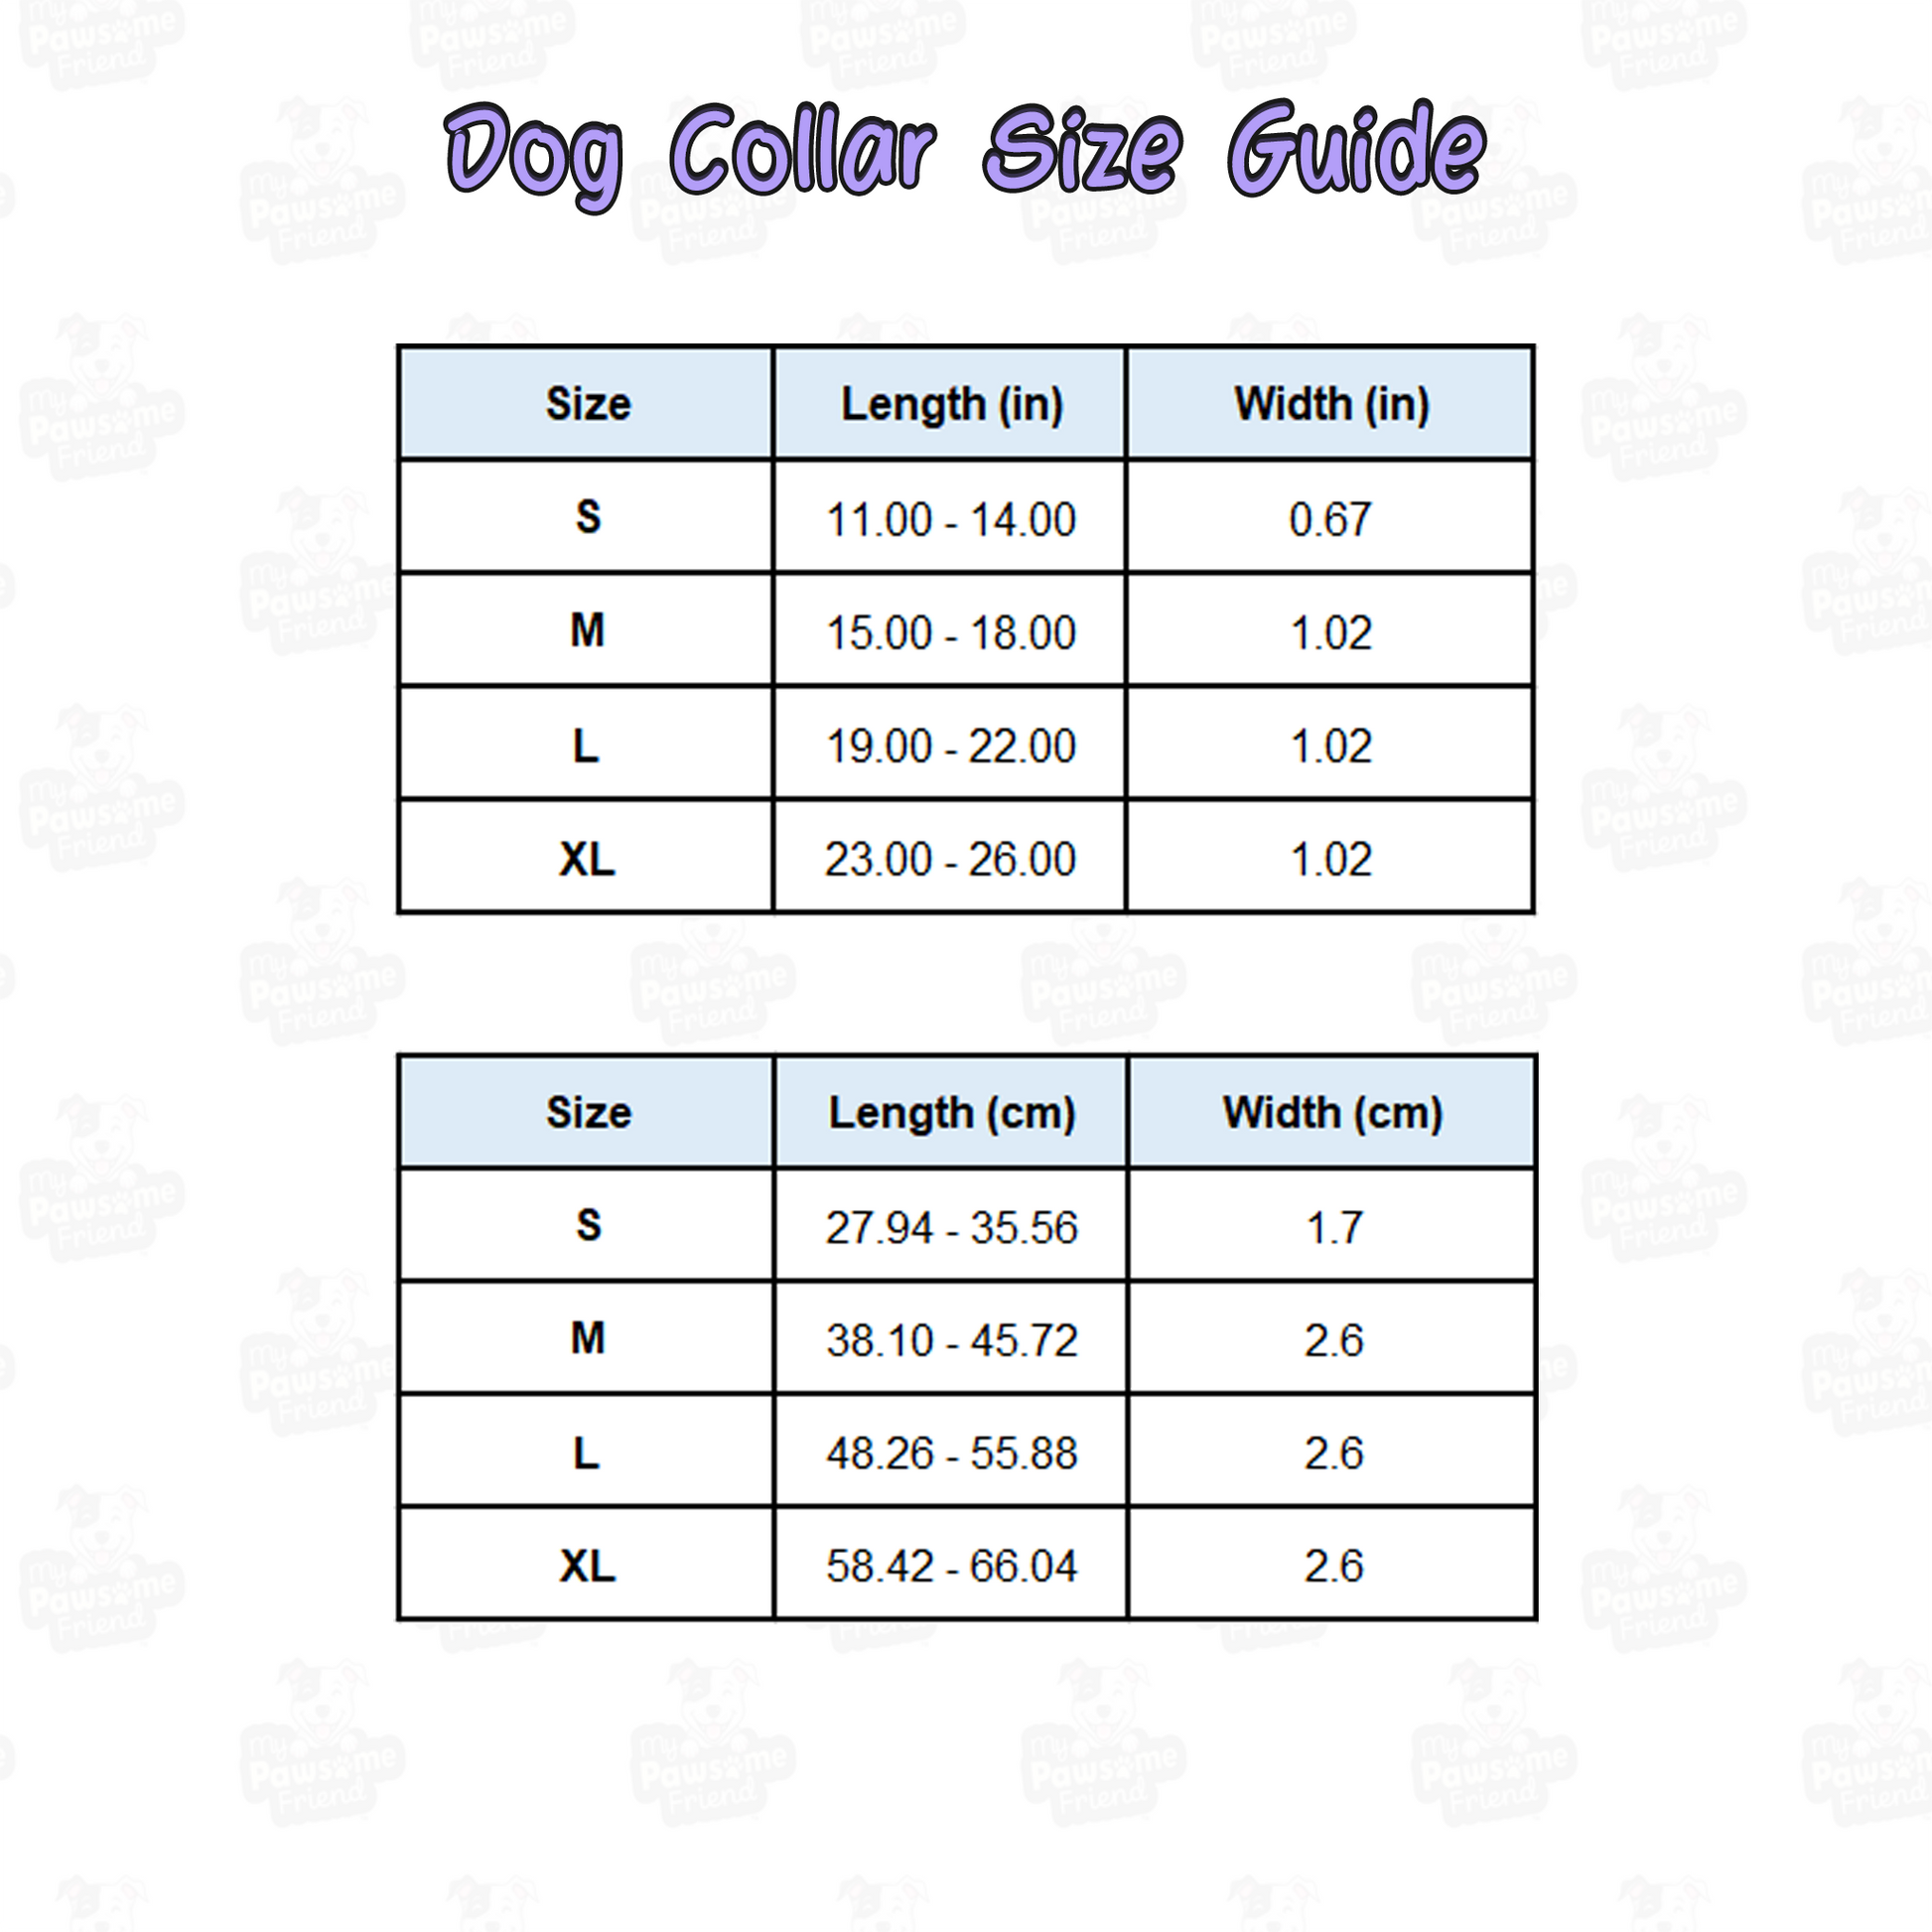 size chart for a dog collar with a beautiful hearts pattern design